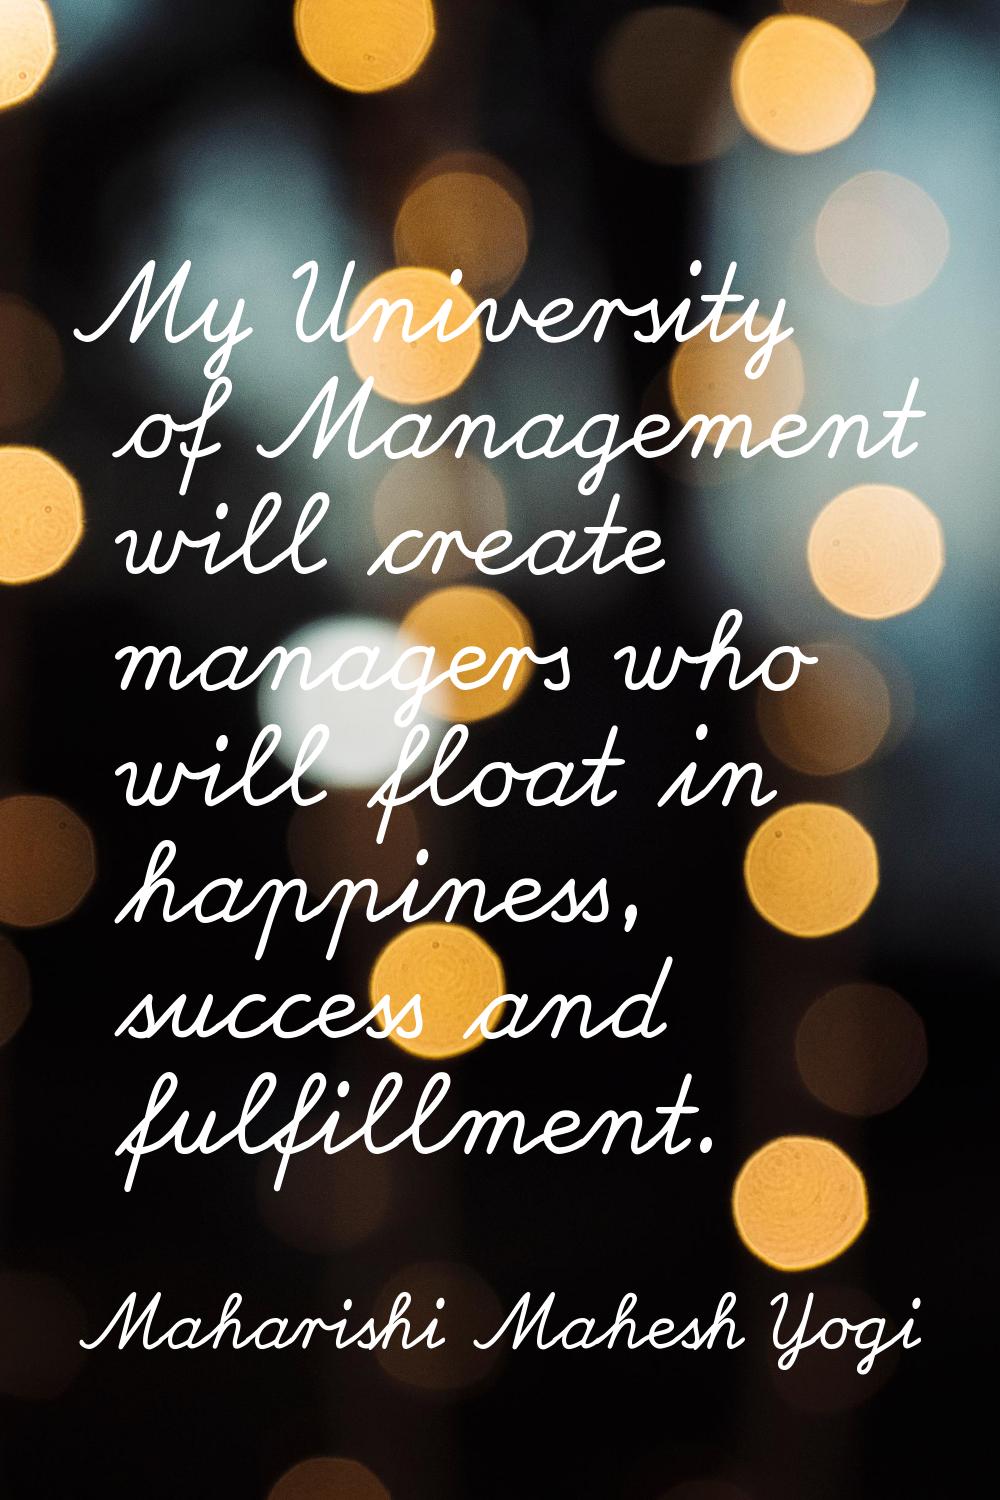 My University of Management will create managers who will float in happiness, success and fulfillme